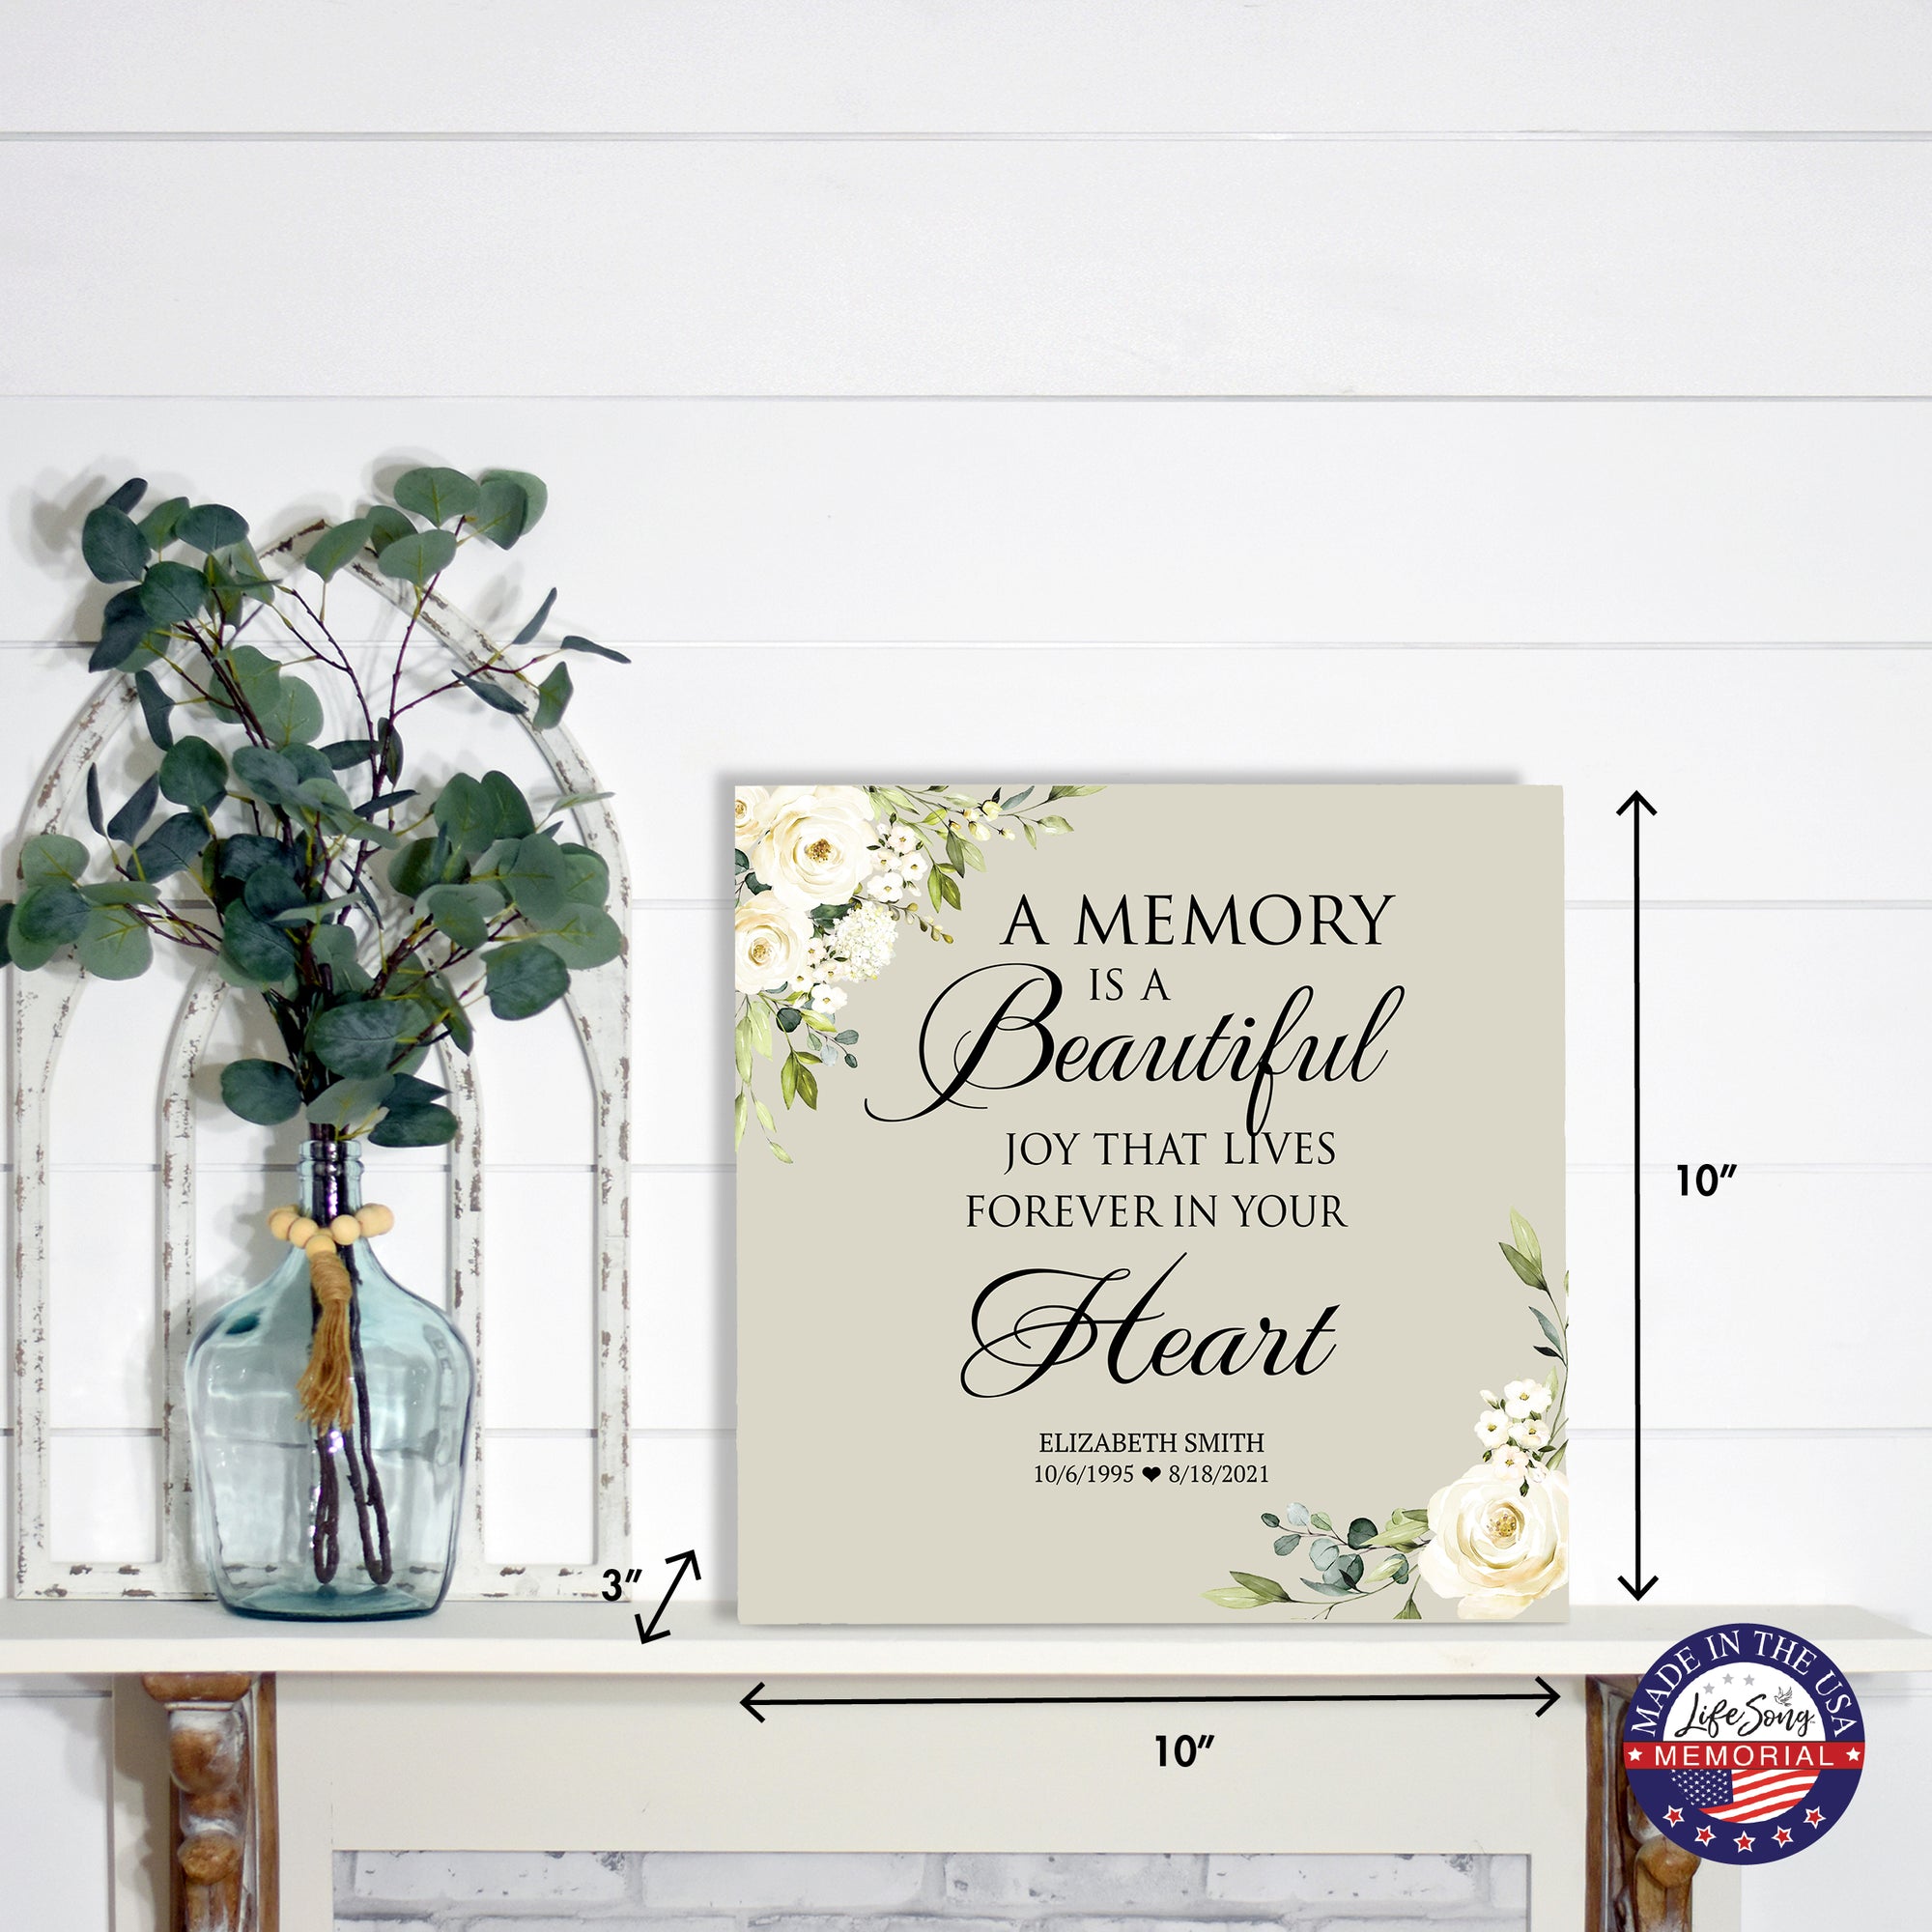 Timeless Human Memorial Shadow Box Urn With Inspirational Verse in Ivory - A Memory Is A Beautiful Joy